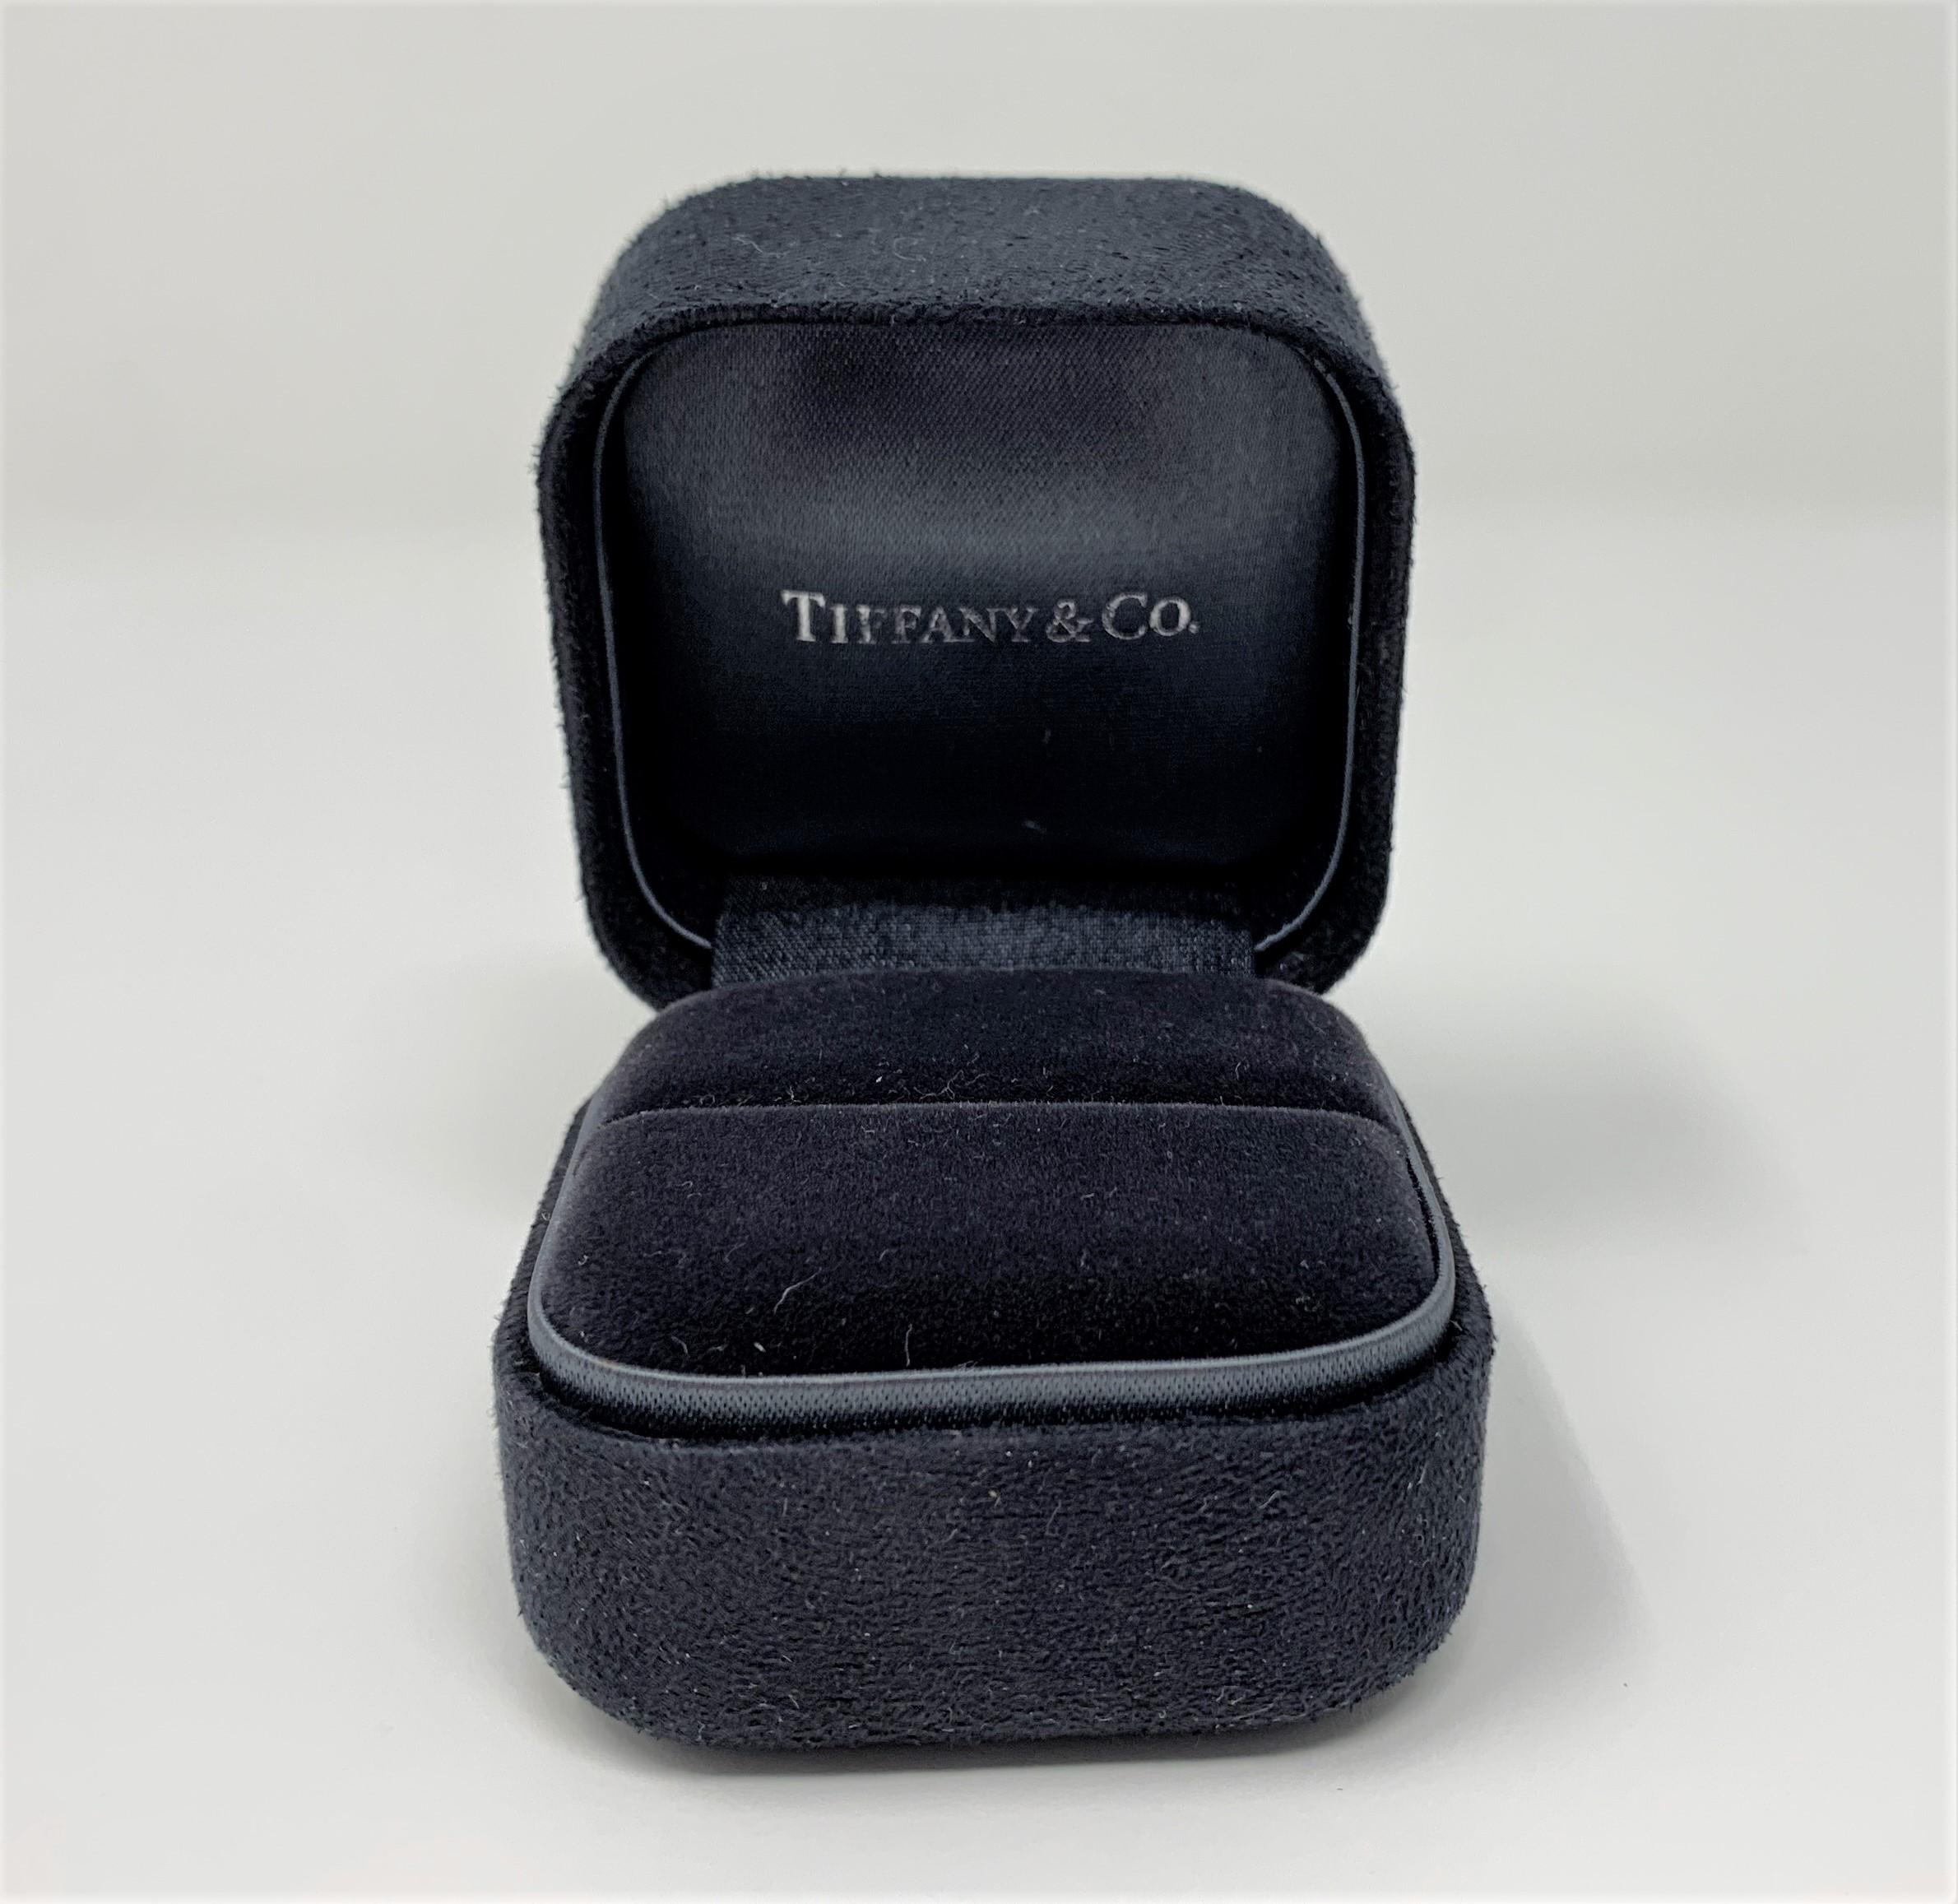 Tiffany & Co. .55 Carat Square Solitaire Diamond Engagement Ring G VS2 4